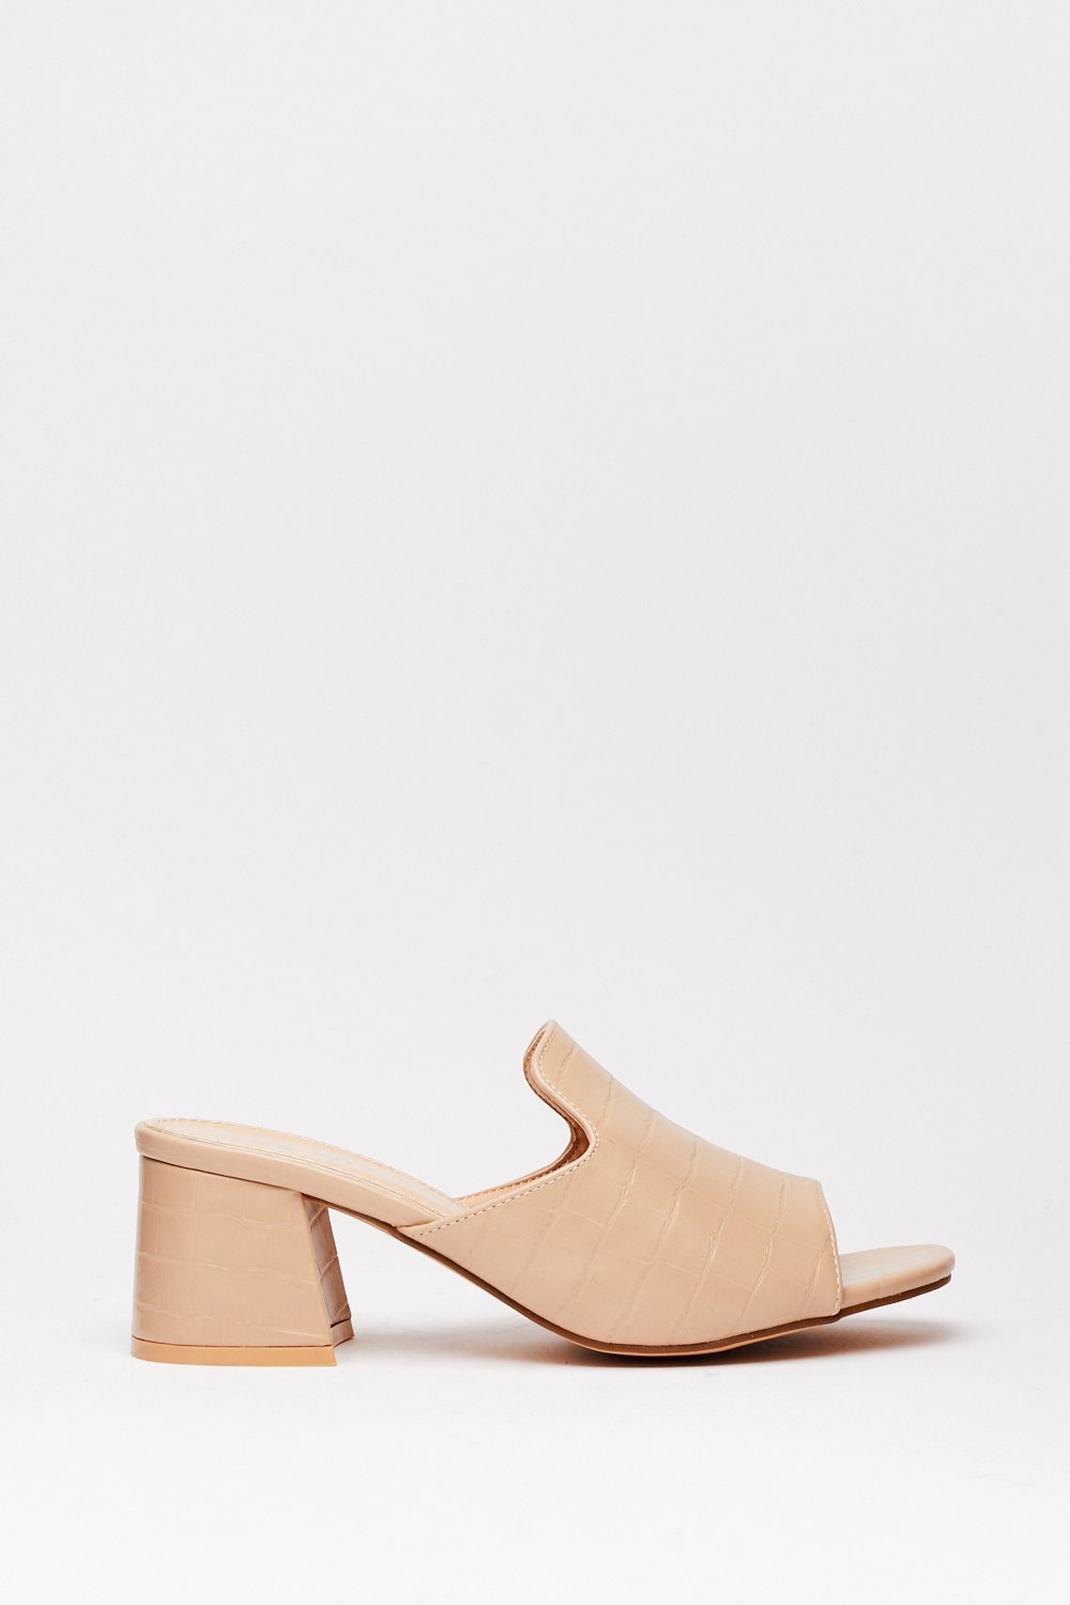 Too Mule for School Heeled Loafer Mules image number 1